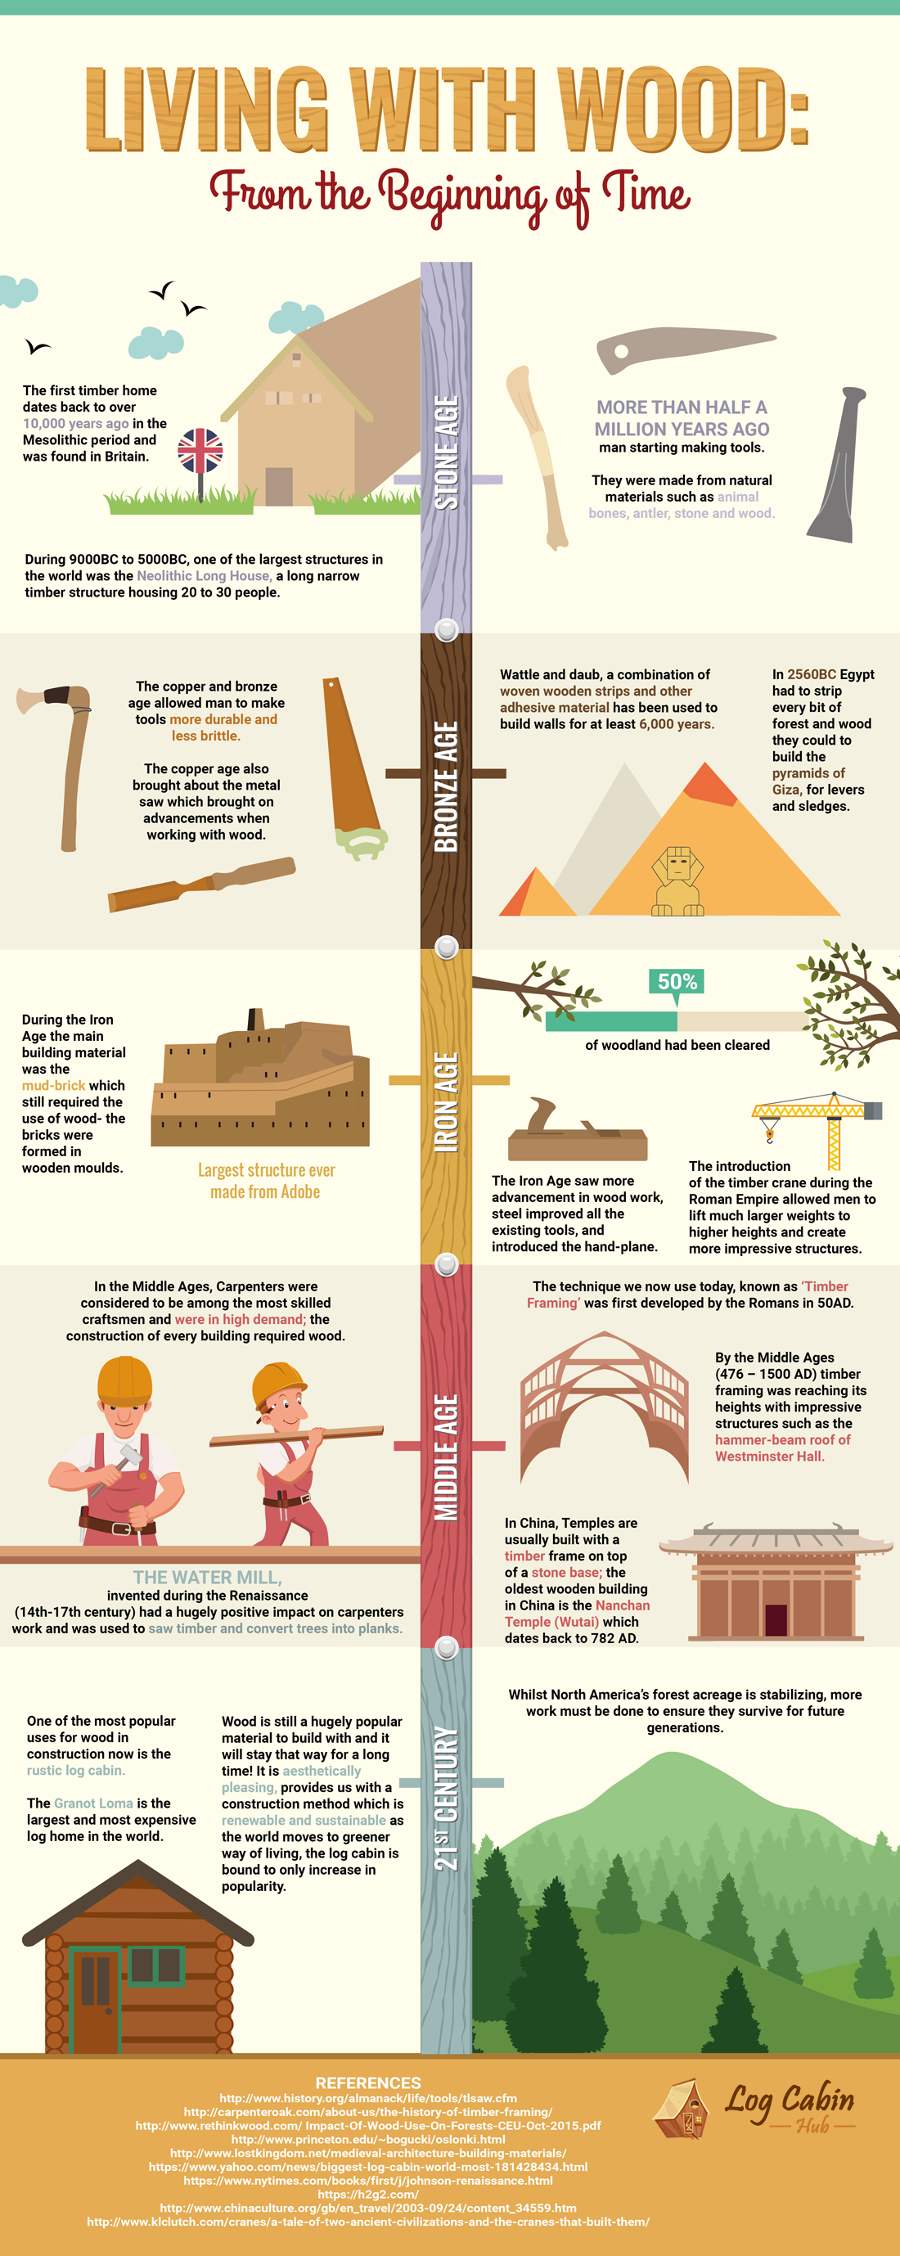 Living with wood history infographic